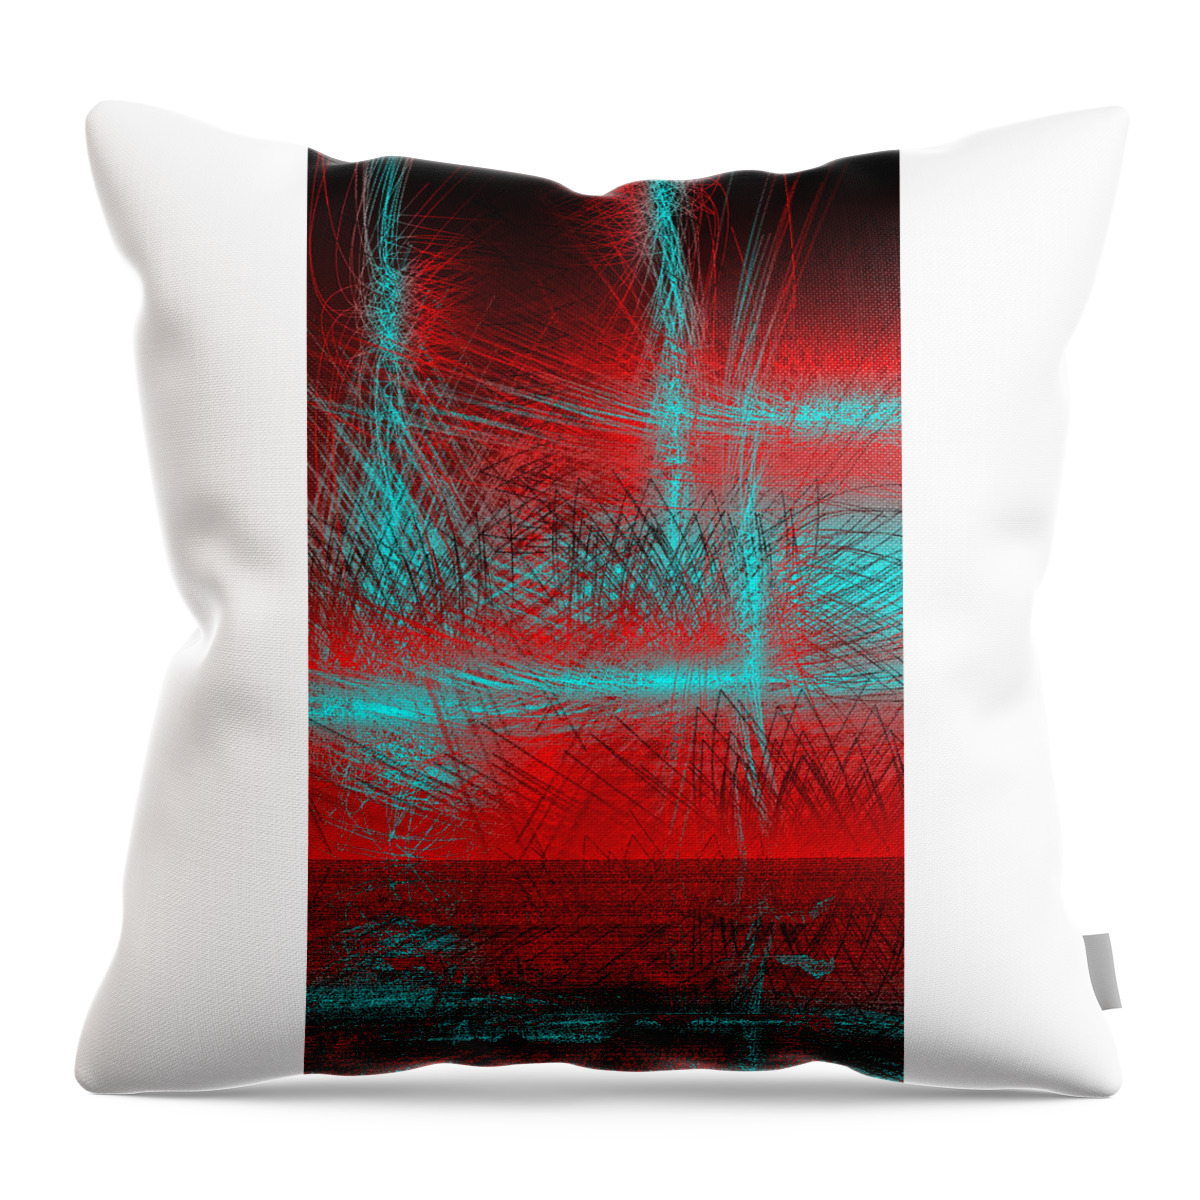 Rithmart Abstract Lines Organic Random Computer Digital Shapes Abstract Acanvas Algorithm Art Below Colors Designed Digital Display Drawn Images Number One Organic Recursive Reflection Series Shadowy Shapes Small Streaming Using Watery Throw Pillow featuring the digital art Ac-1-8 by Gareth Lewis